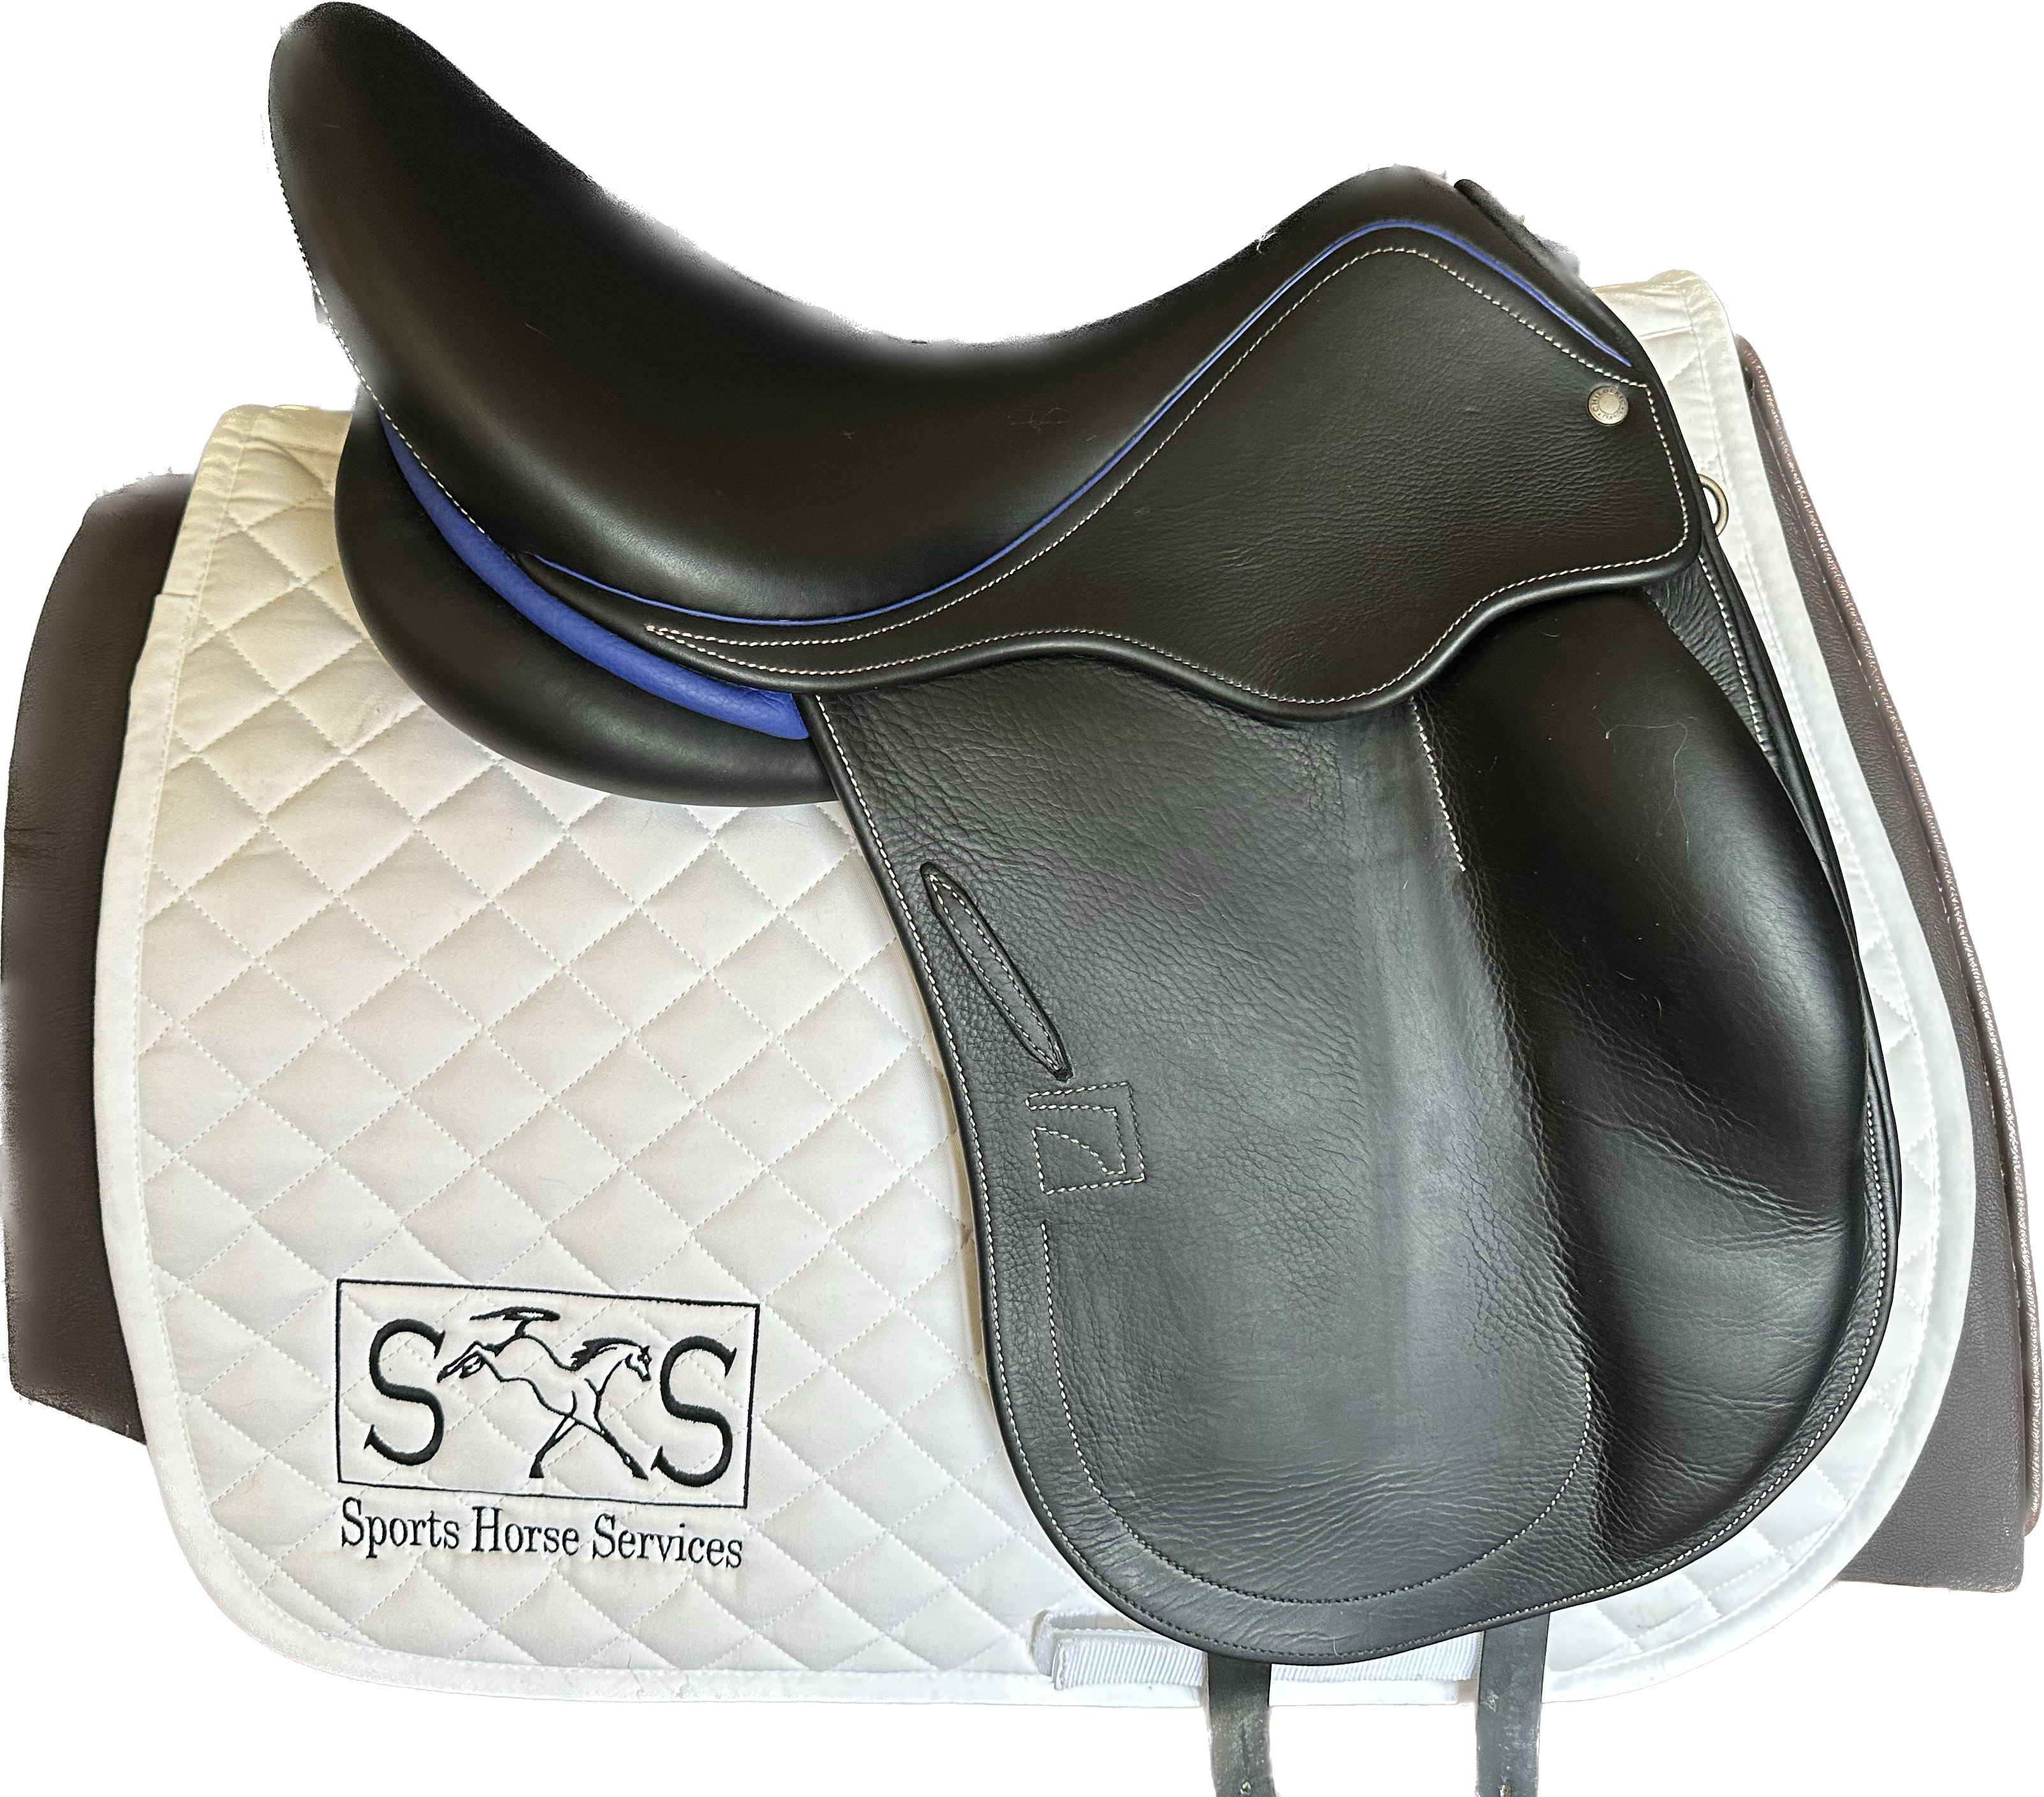 CHILDÉRIC DNL Monoflap Dressage Saddle 17” MW  Immaculate Condition. Barely used